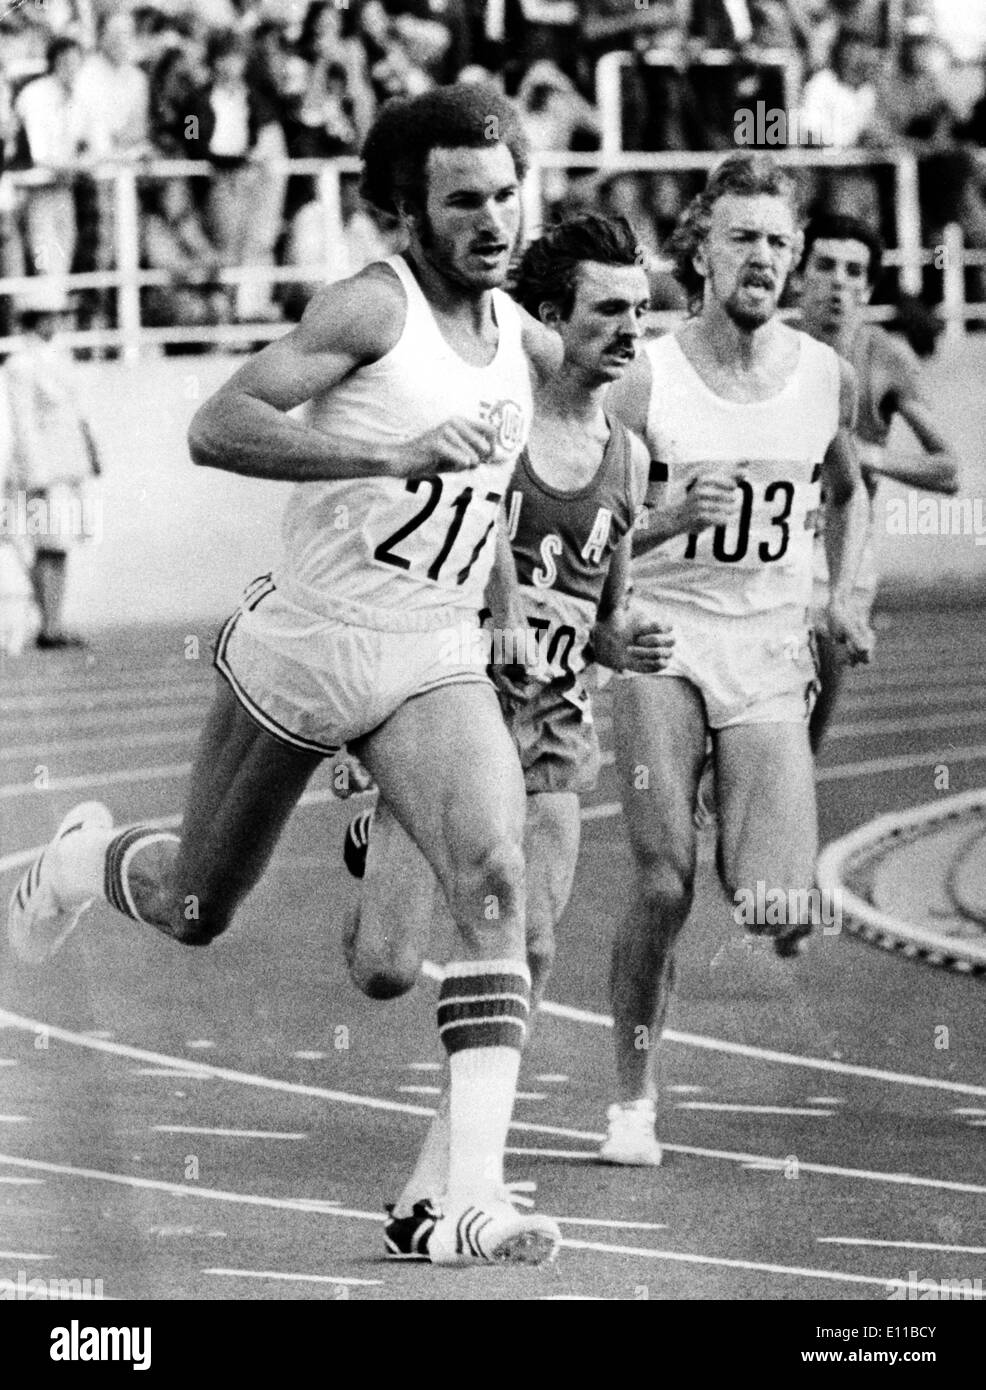 Jul 08, 1976; Montreal, Canada; Winner of the 800 meter dash, ALBERT JUANTORENA of Cuba takes the lead and goes on to win the Gold medal in the Olympic Games 1976 in Montreal.. (Credit Image: KEYSTONE Pictures USA/ZUMAPRESS.com) Stock Photo